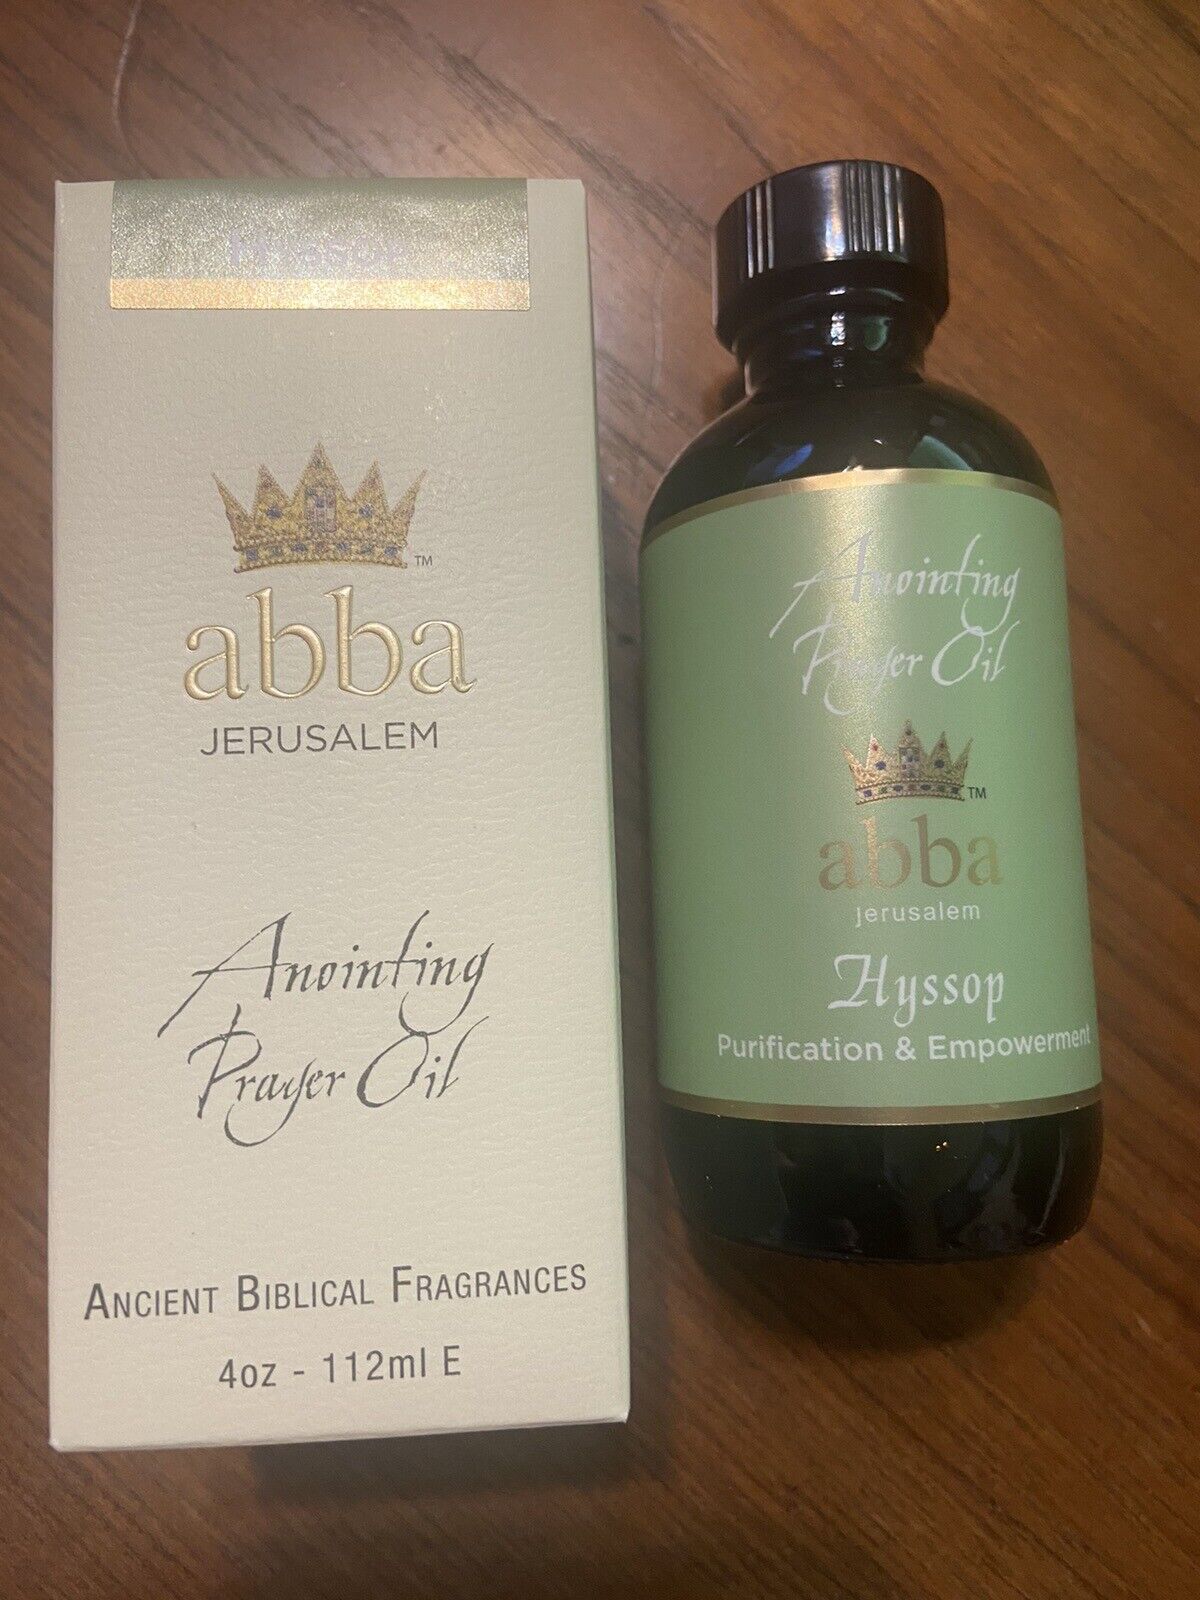 Abba Anointing Oil Hyssop 4oz - Purification & Empowerment Altar Size Holy Fire